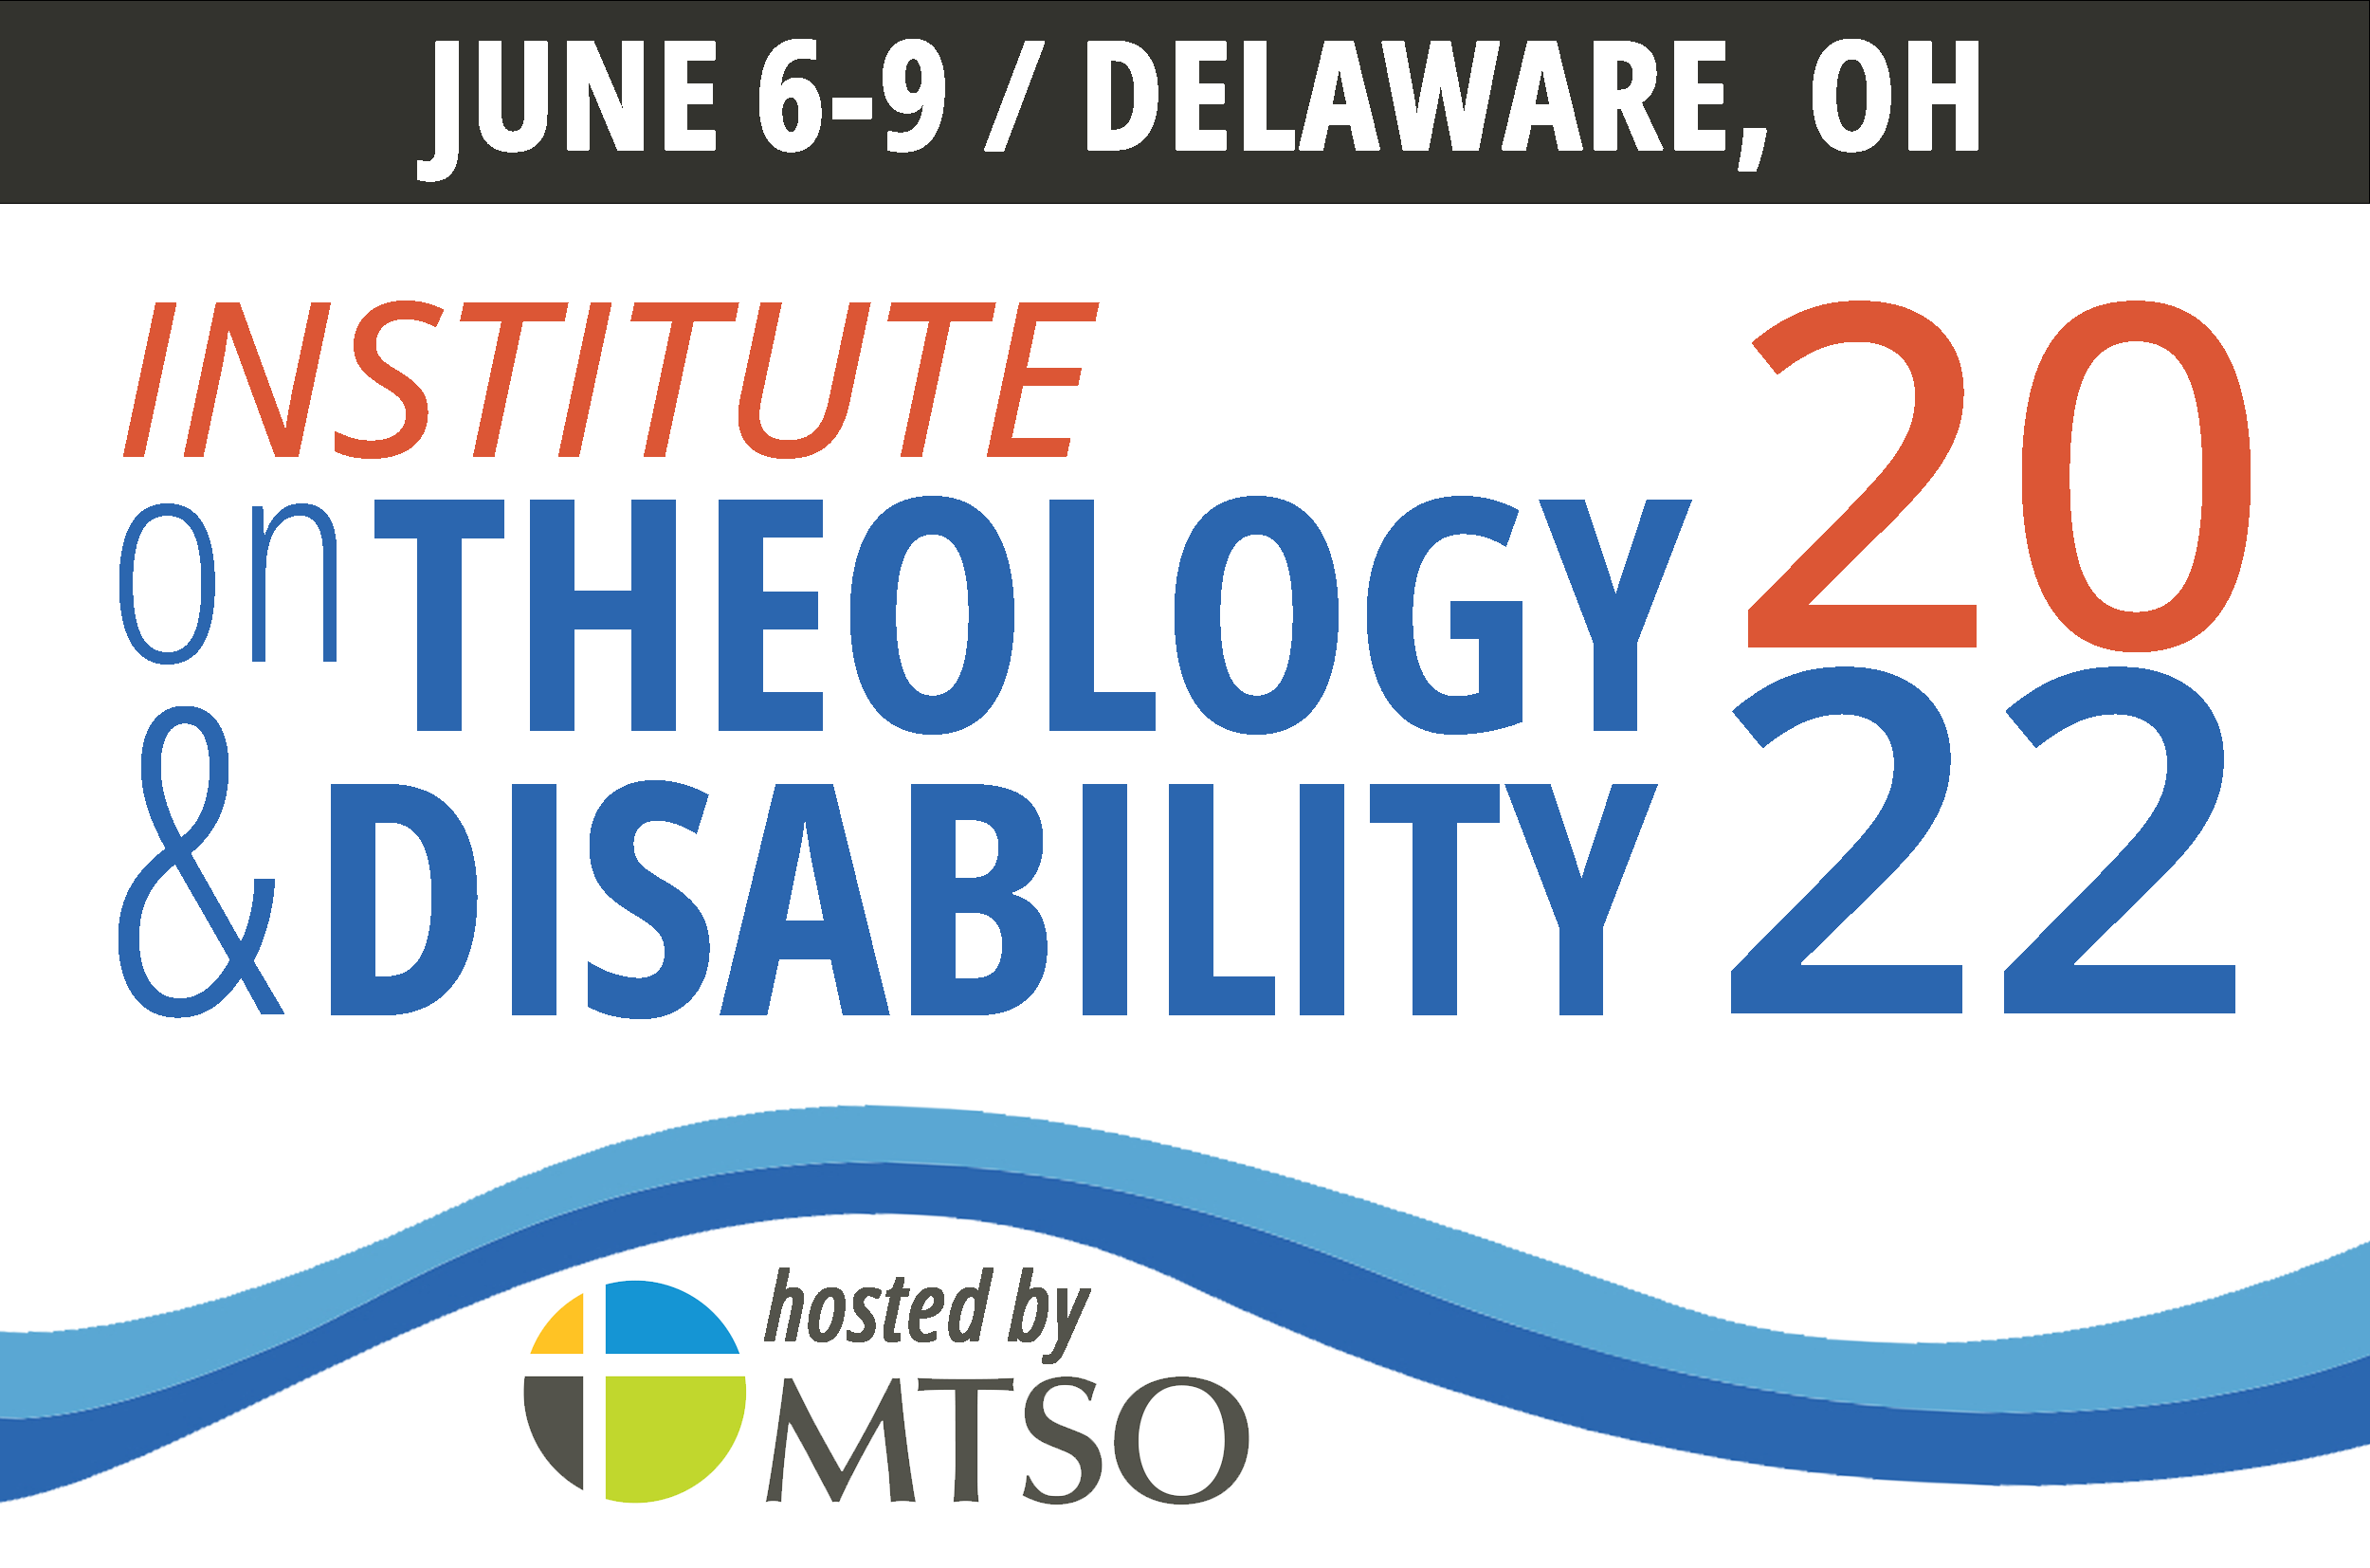 ITD logo with "2022," graphical elements, "June 6-9 / Delaware, OH and "hosted by MTSO"